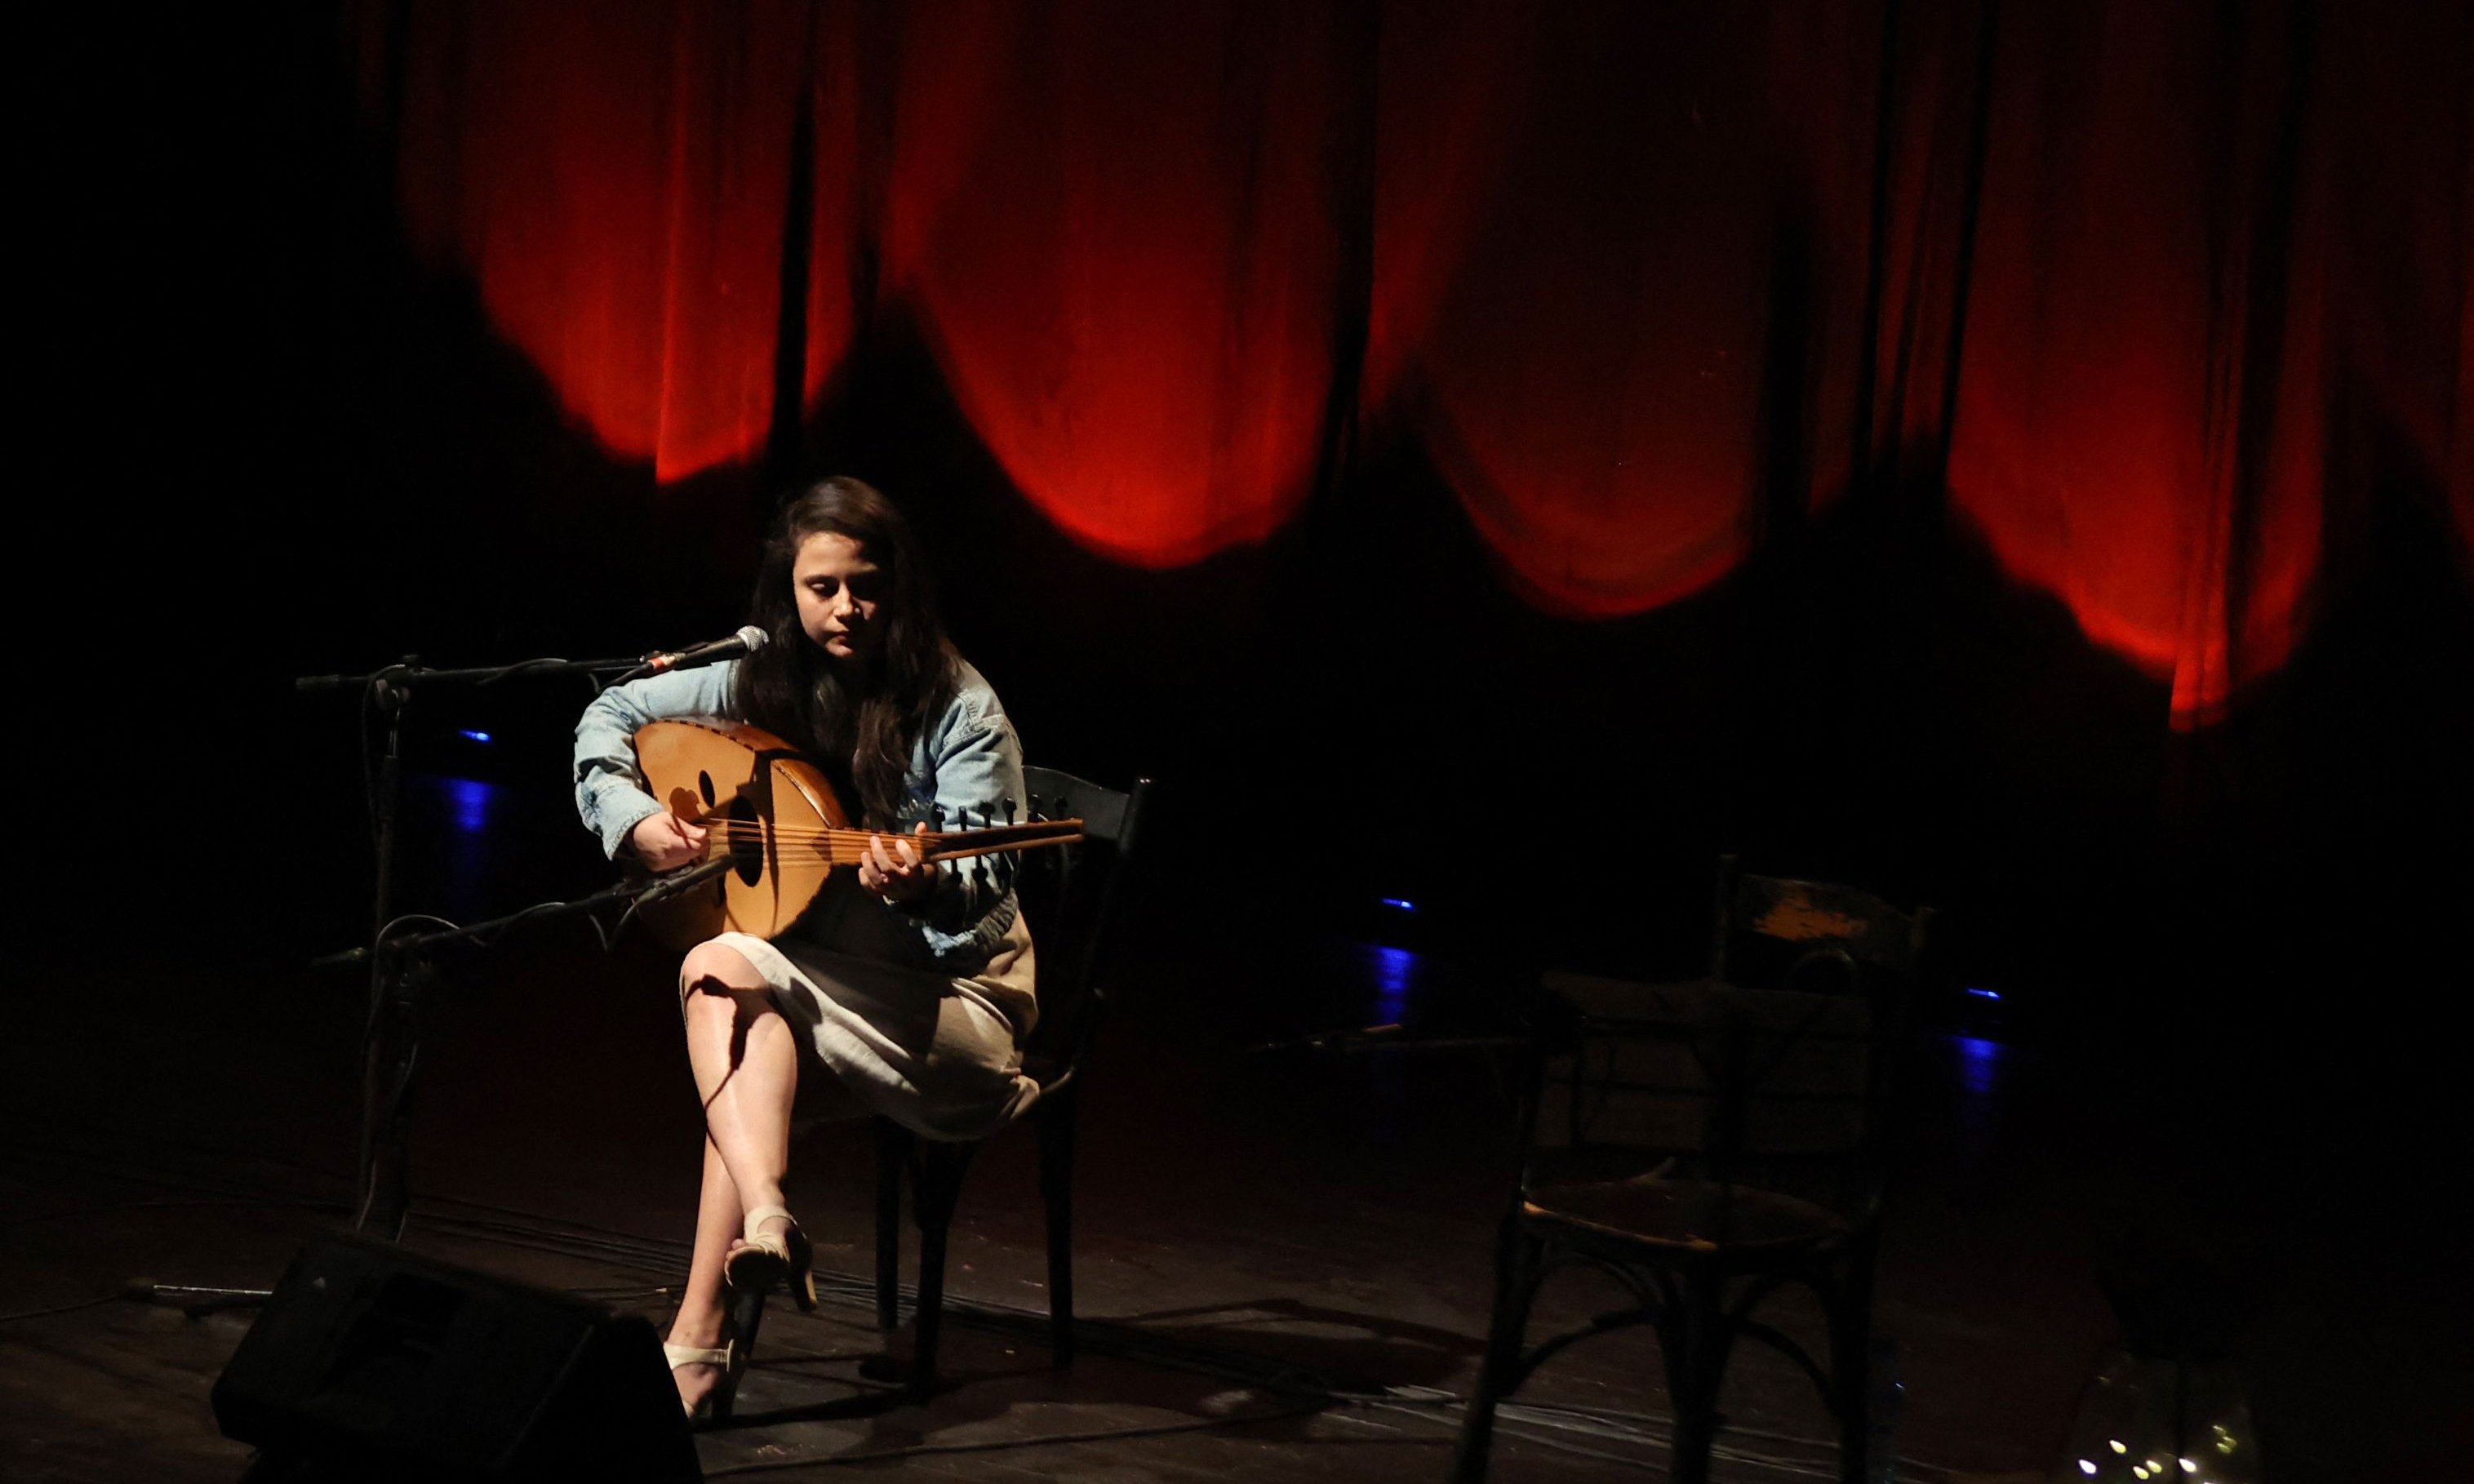 Lebanon's national conservatory of music student Aline Chalvarjian, plays oud (lute) during a concert at the Al-Madina theatre in Beirut.